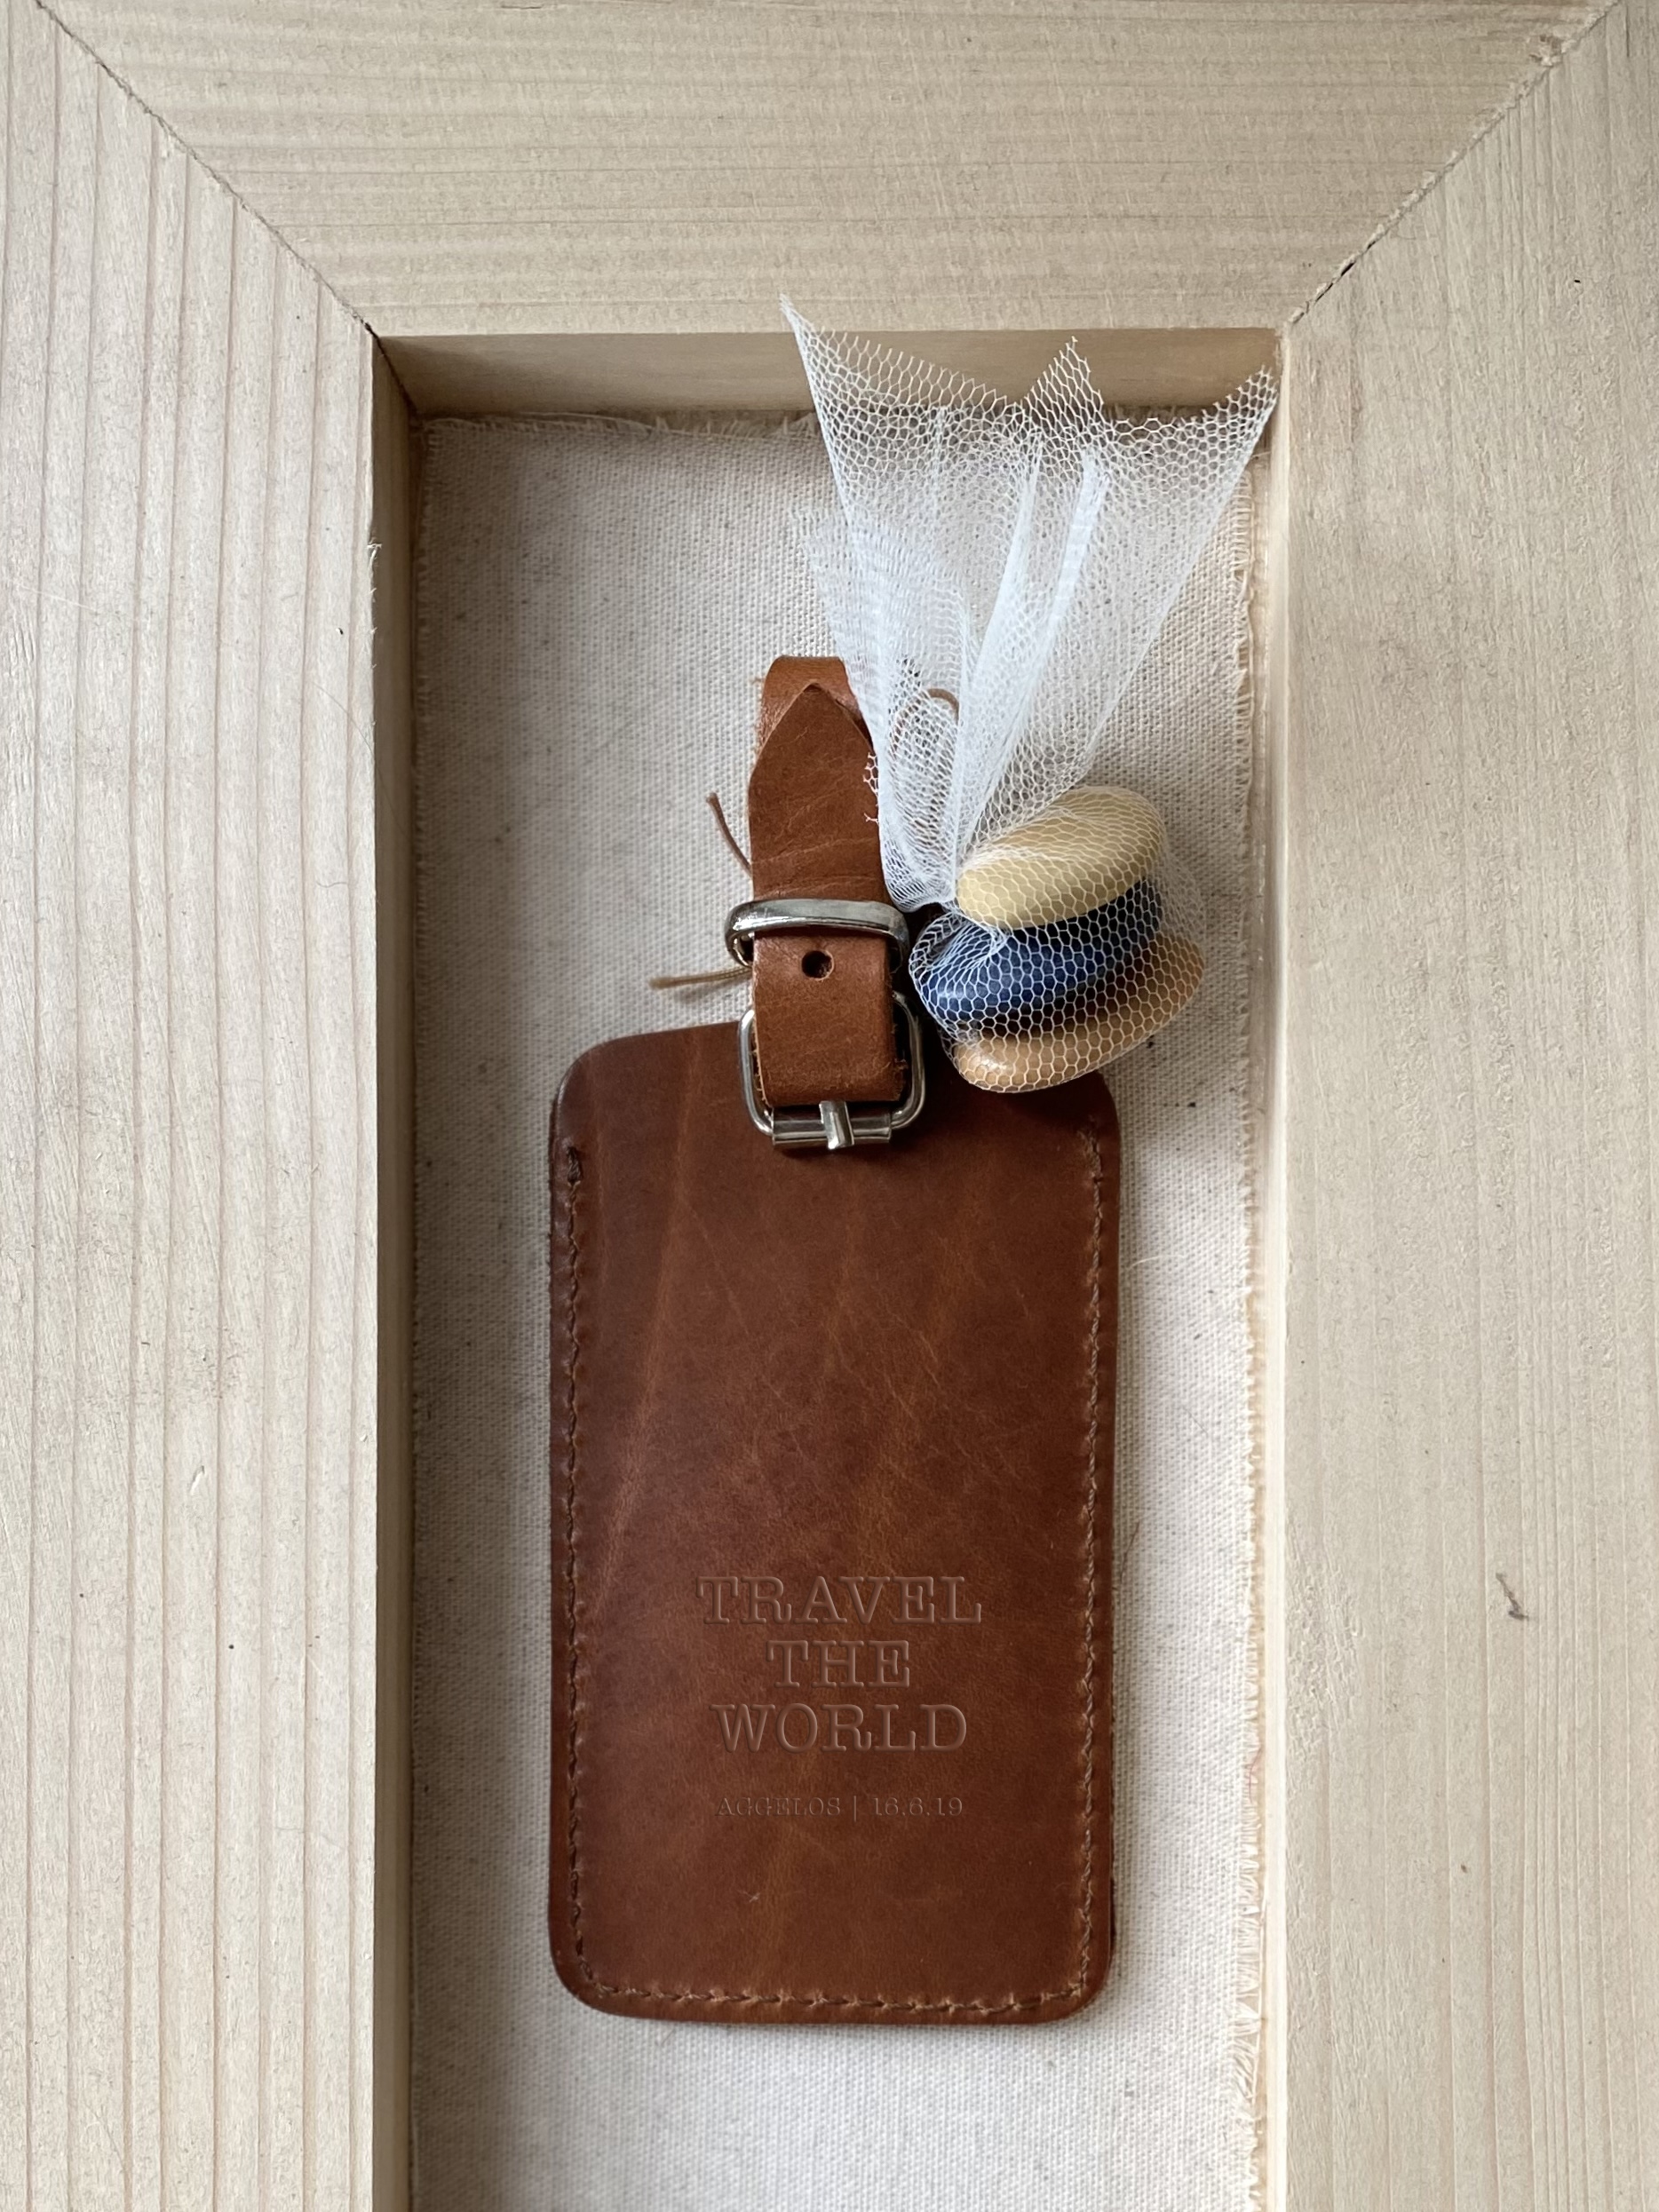 Hot-air-balloon-travel-kit-baptism-luggage-tag-favor-leather